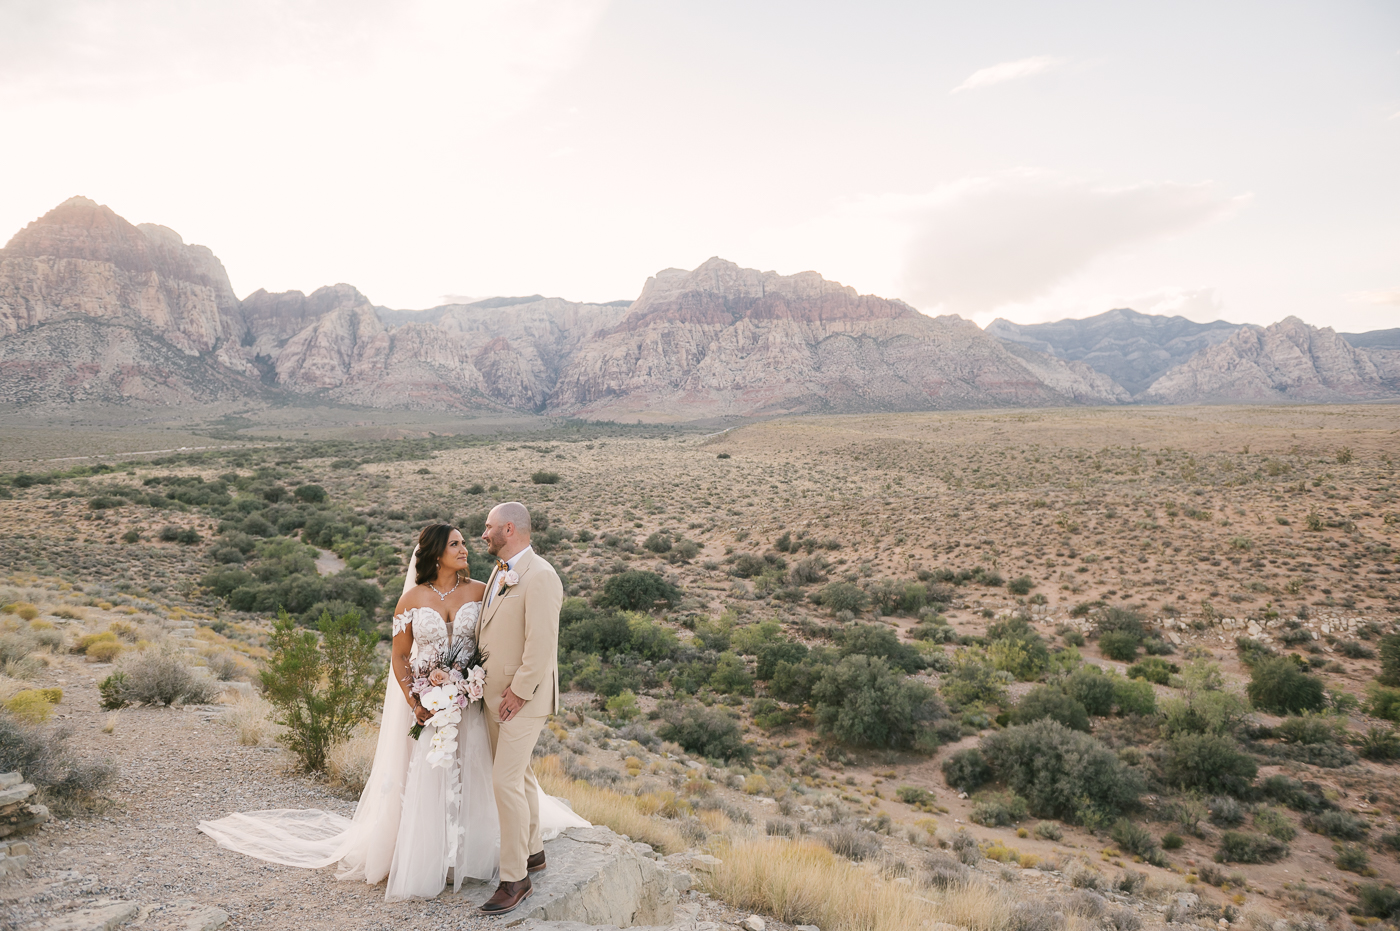 Bride and groom smiling at each other endearingly during their elopement shoot coordinated by Elopement Las Vegas